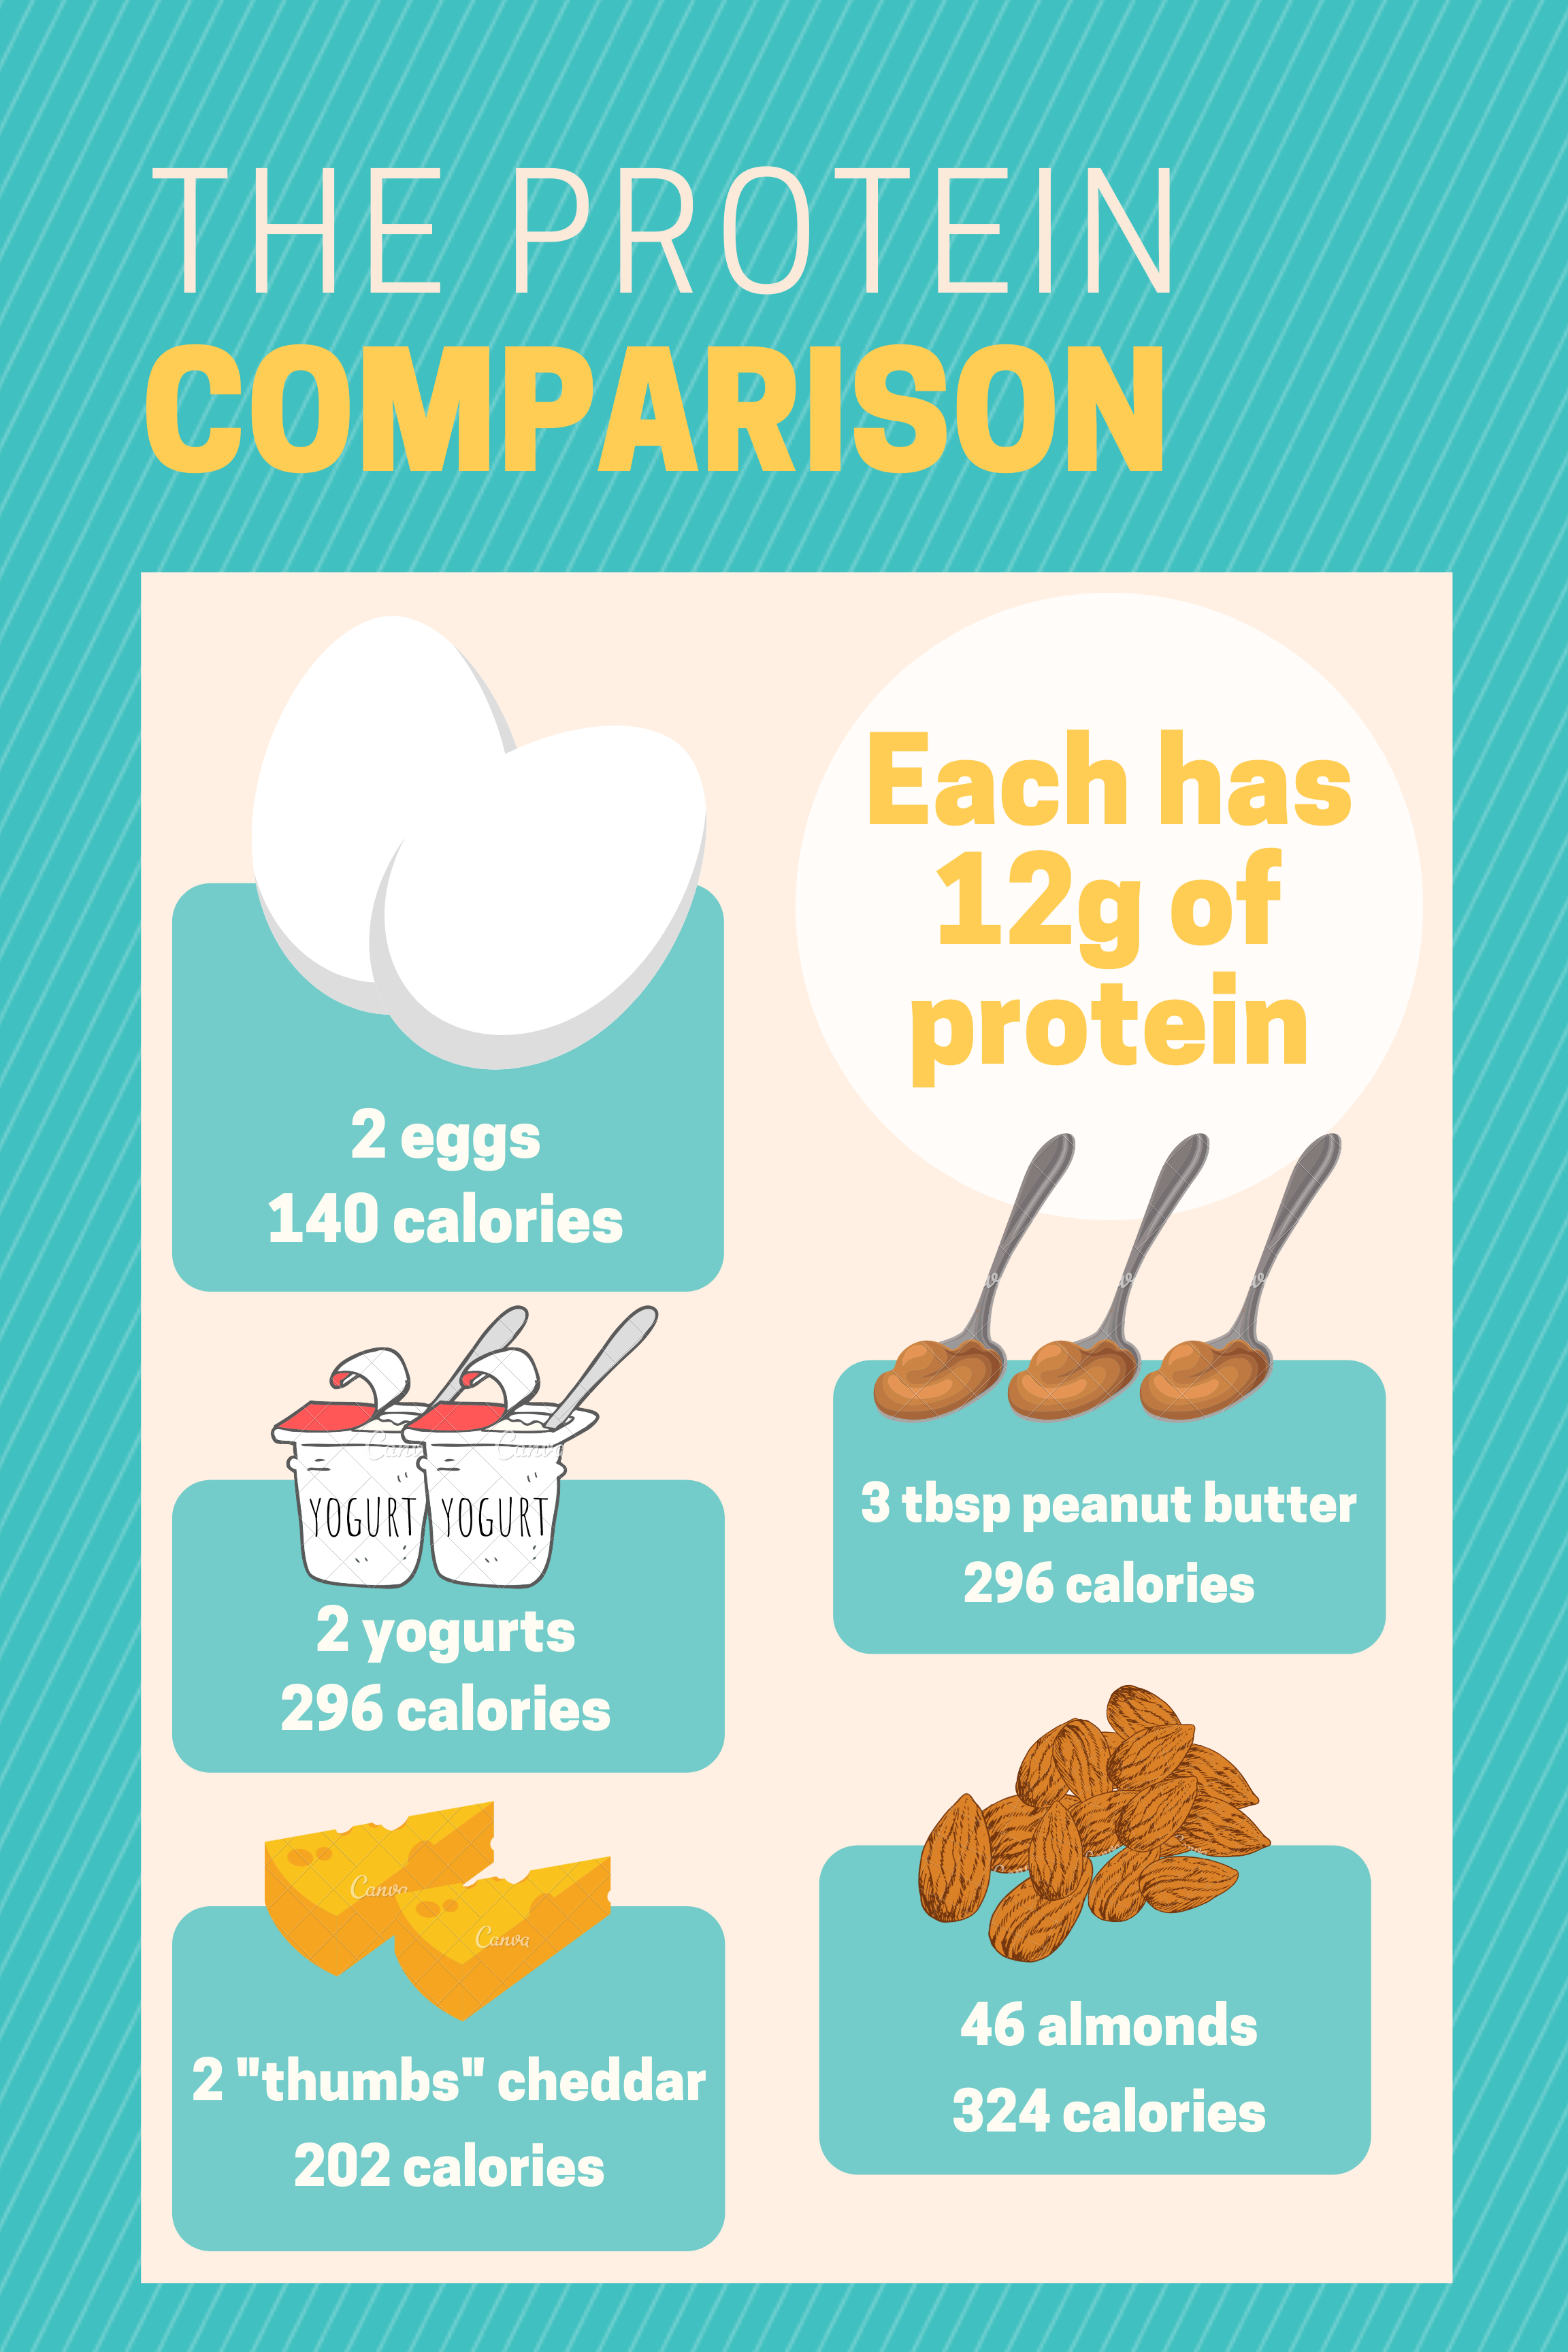 What's For Breakfast Protein Comparison Get Cracking